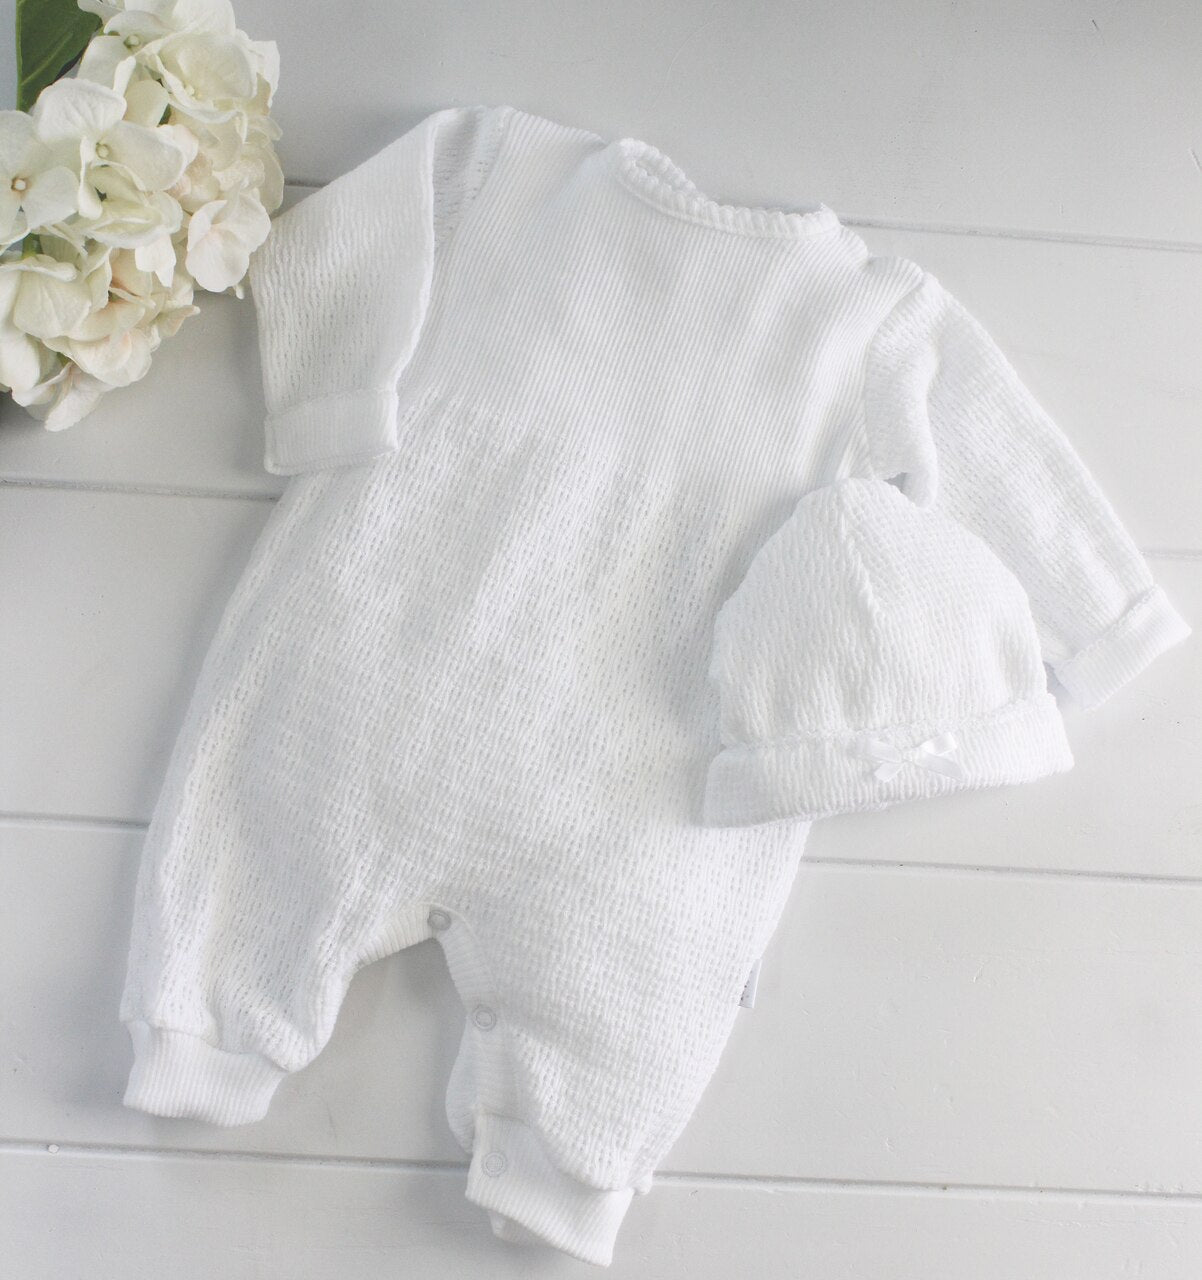 White Unisex Take Home Sleeper Paty Inc Baby Clothes